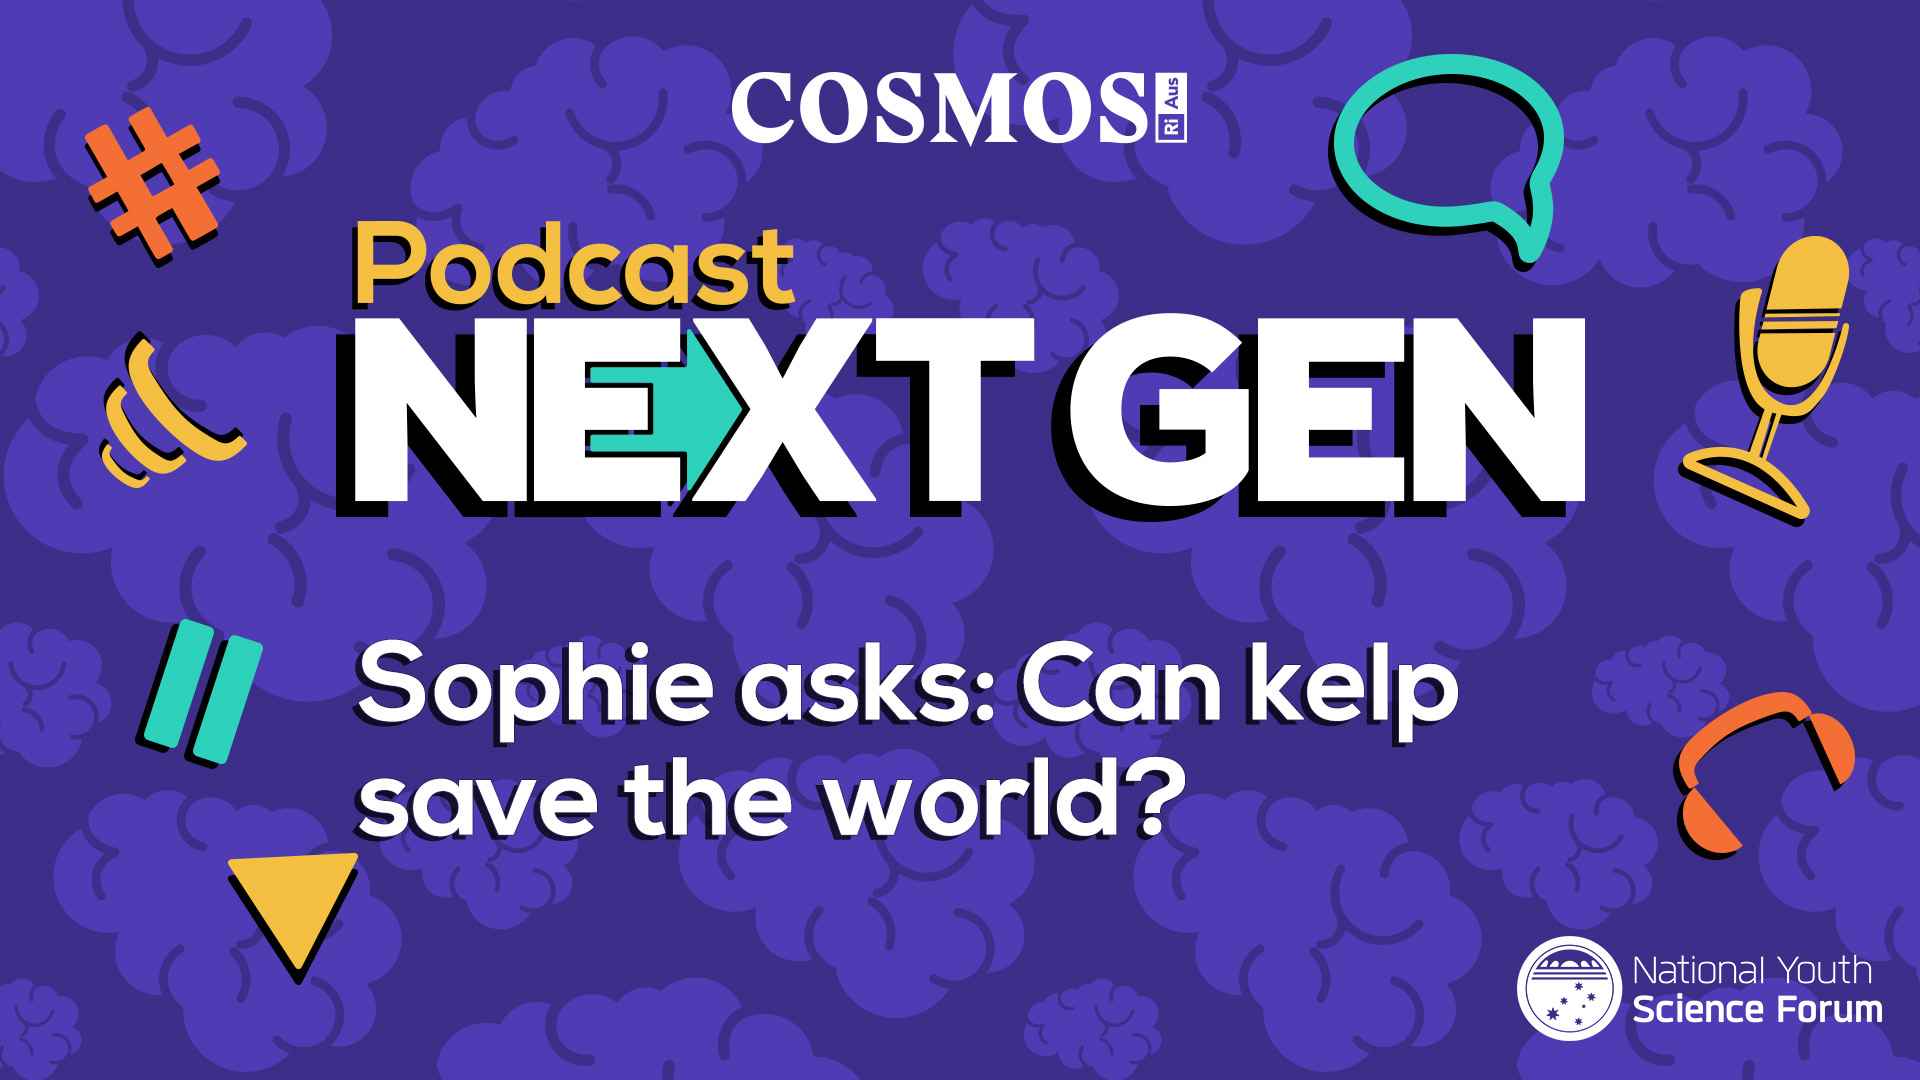 PODCAST NEXT GEN: Can kelp save the world?